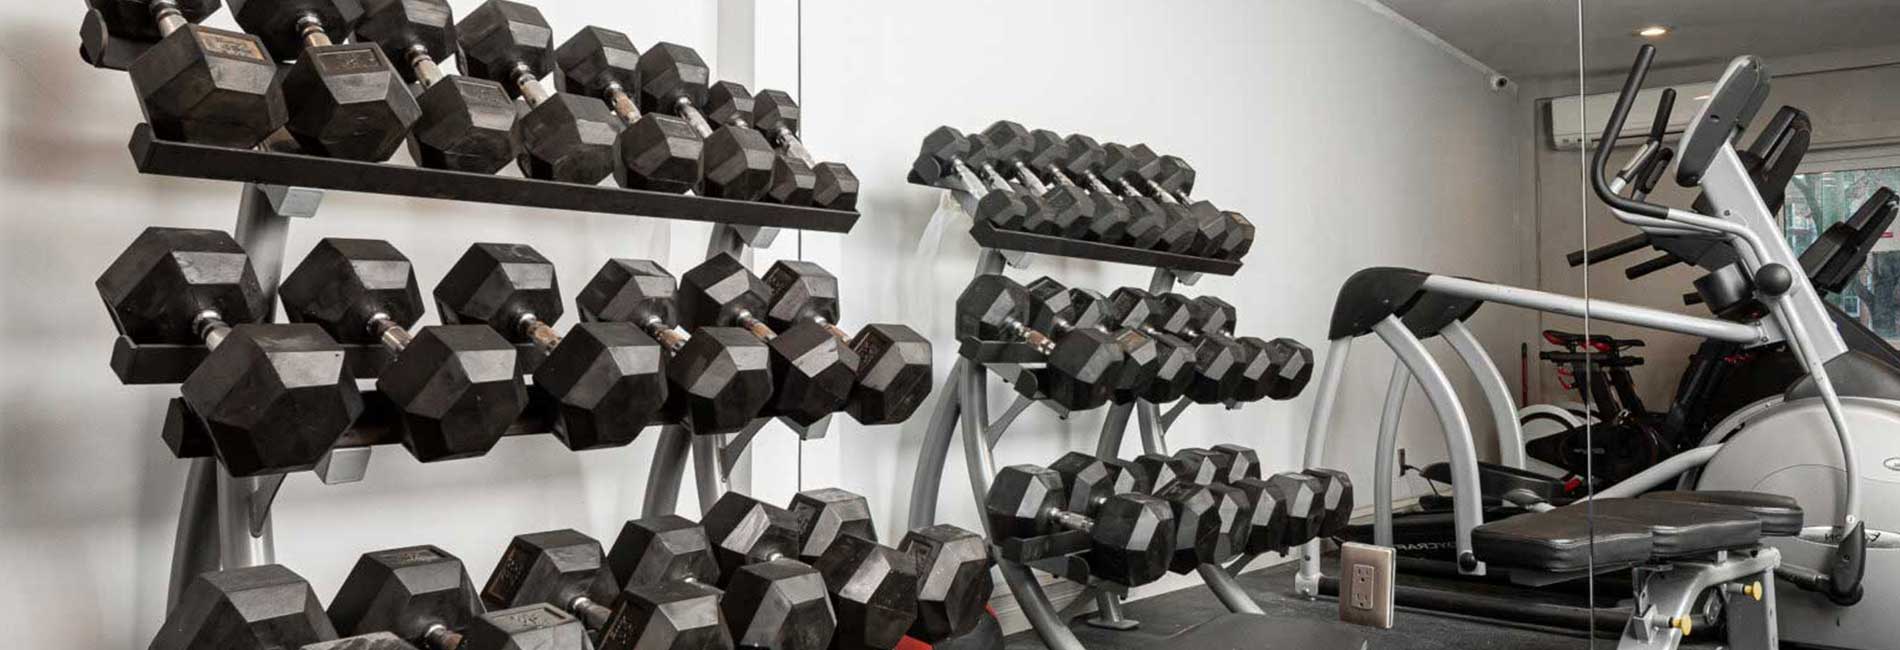 Weights and Cardio Equipment in River Edge at Nyack Fitness Center